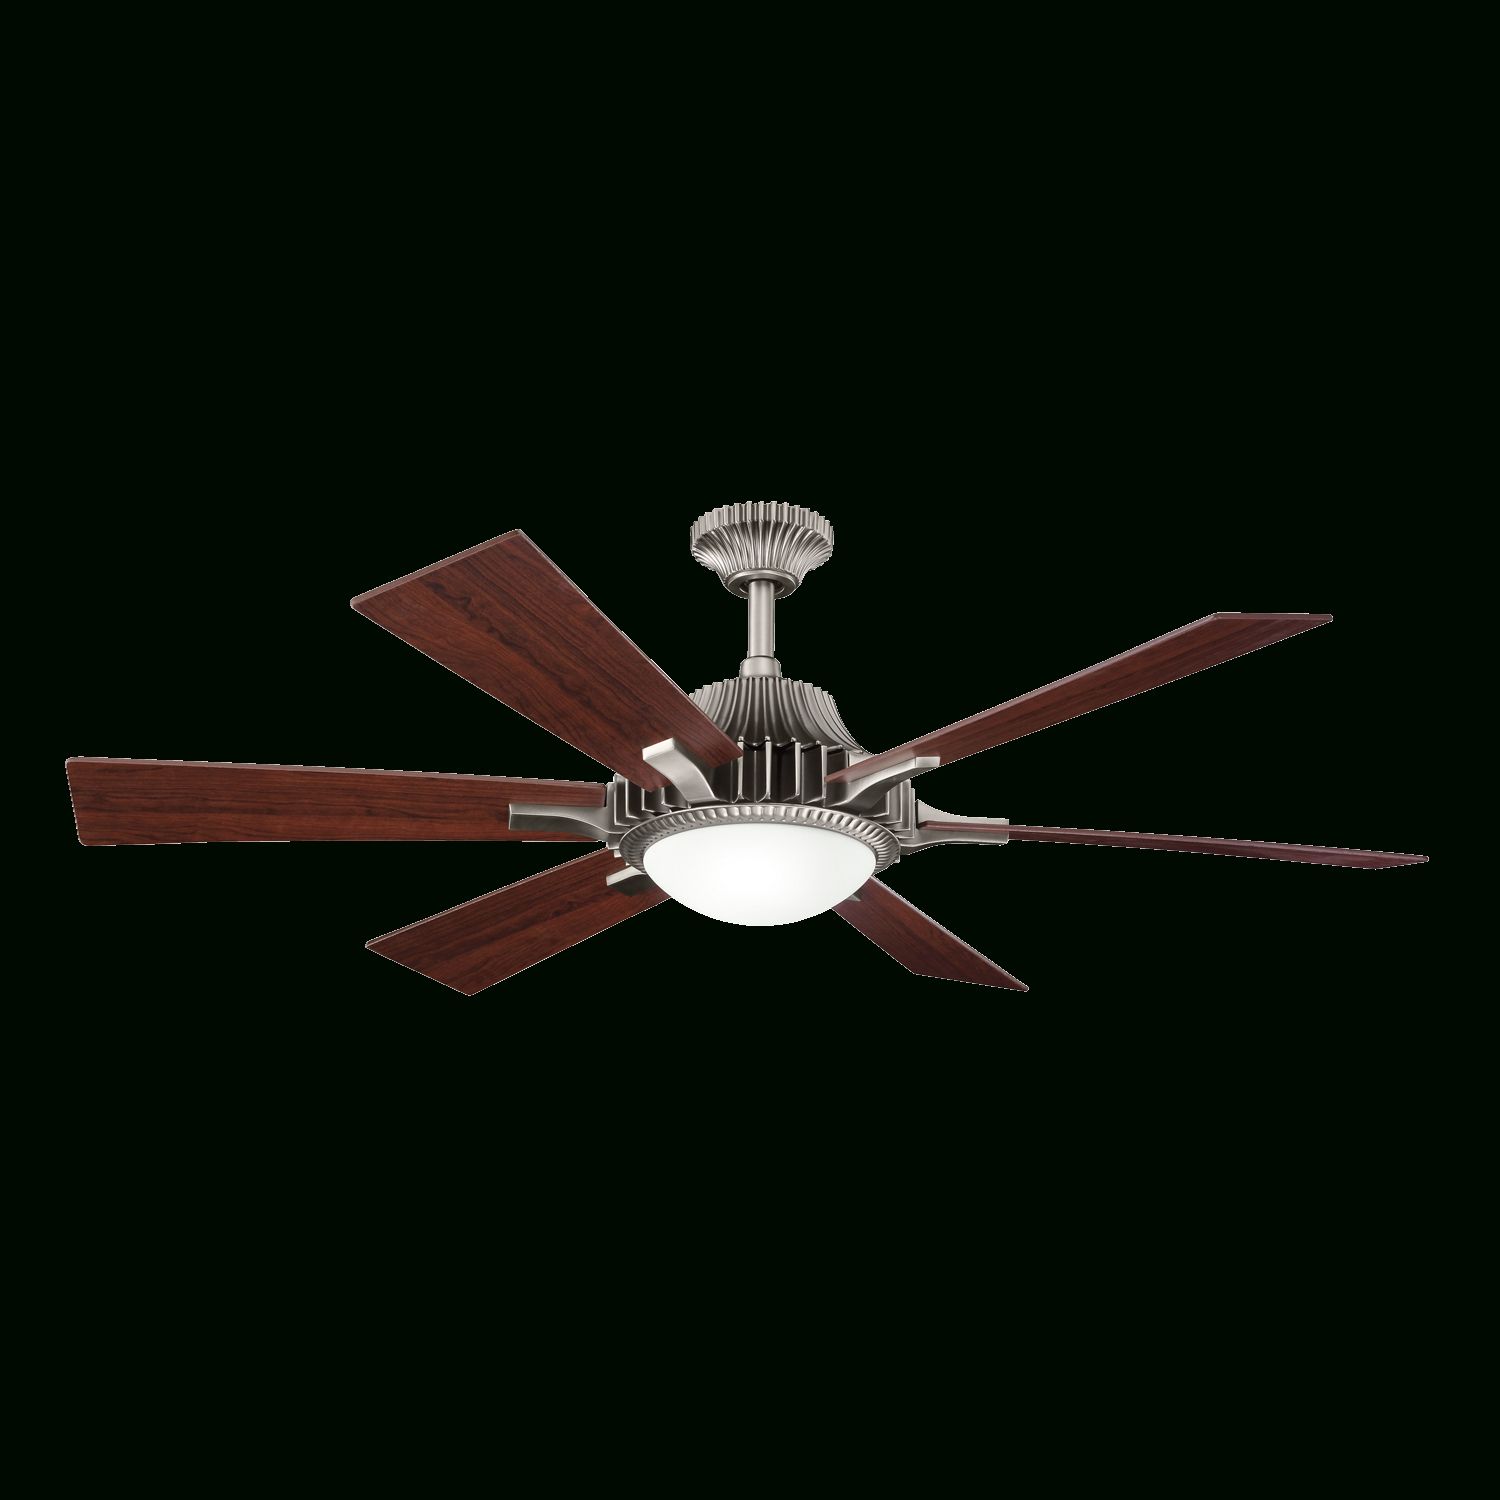 Troxler 3 Blade Ceiling Fans With Regard To Newest 52 Inch Valkyrie Fan Ap (View 14 of 20)